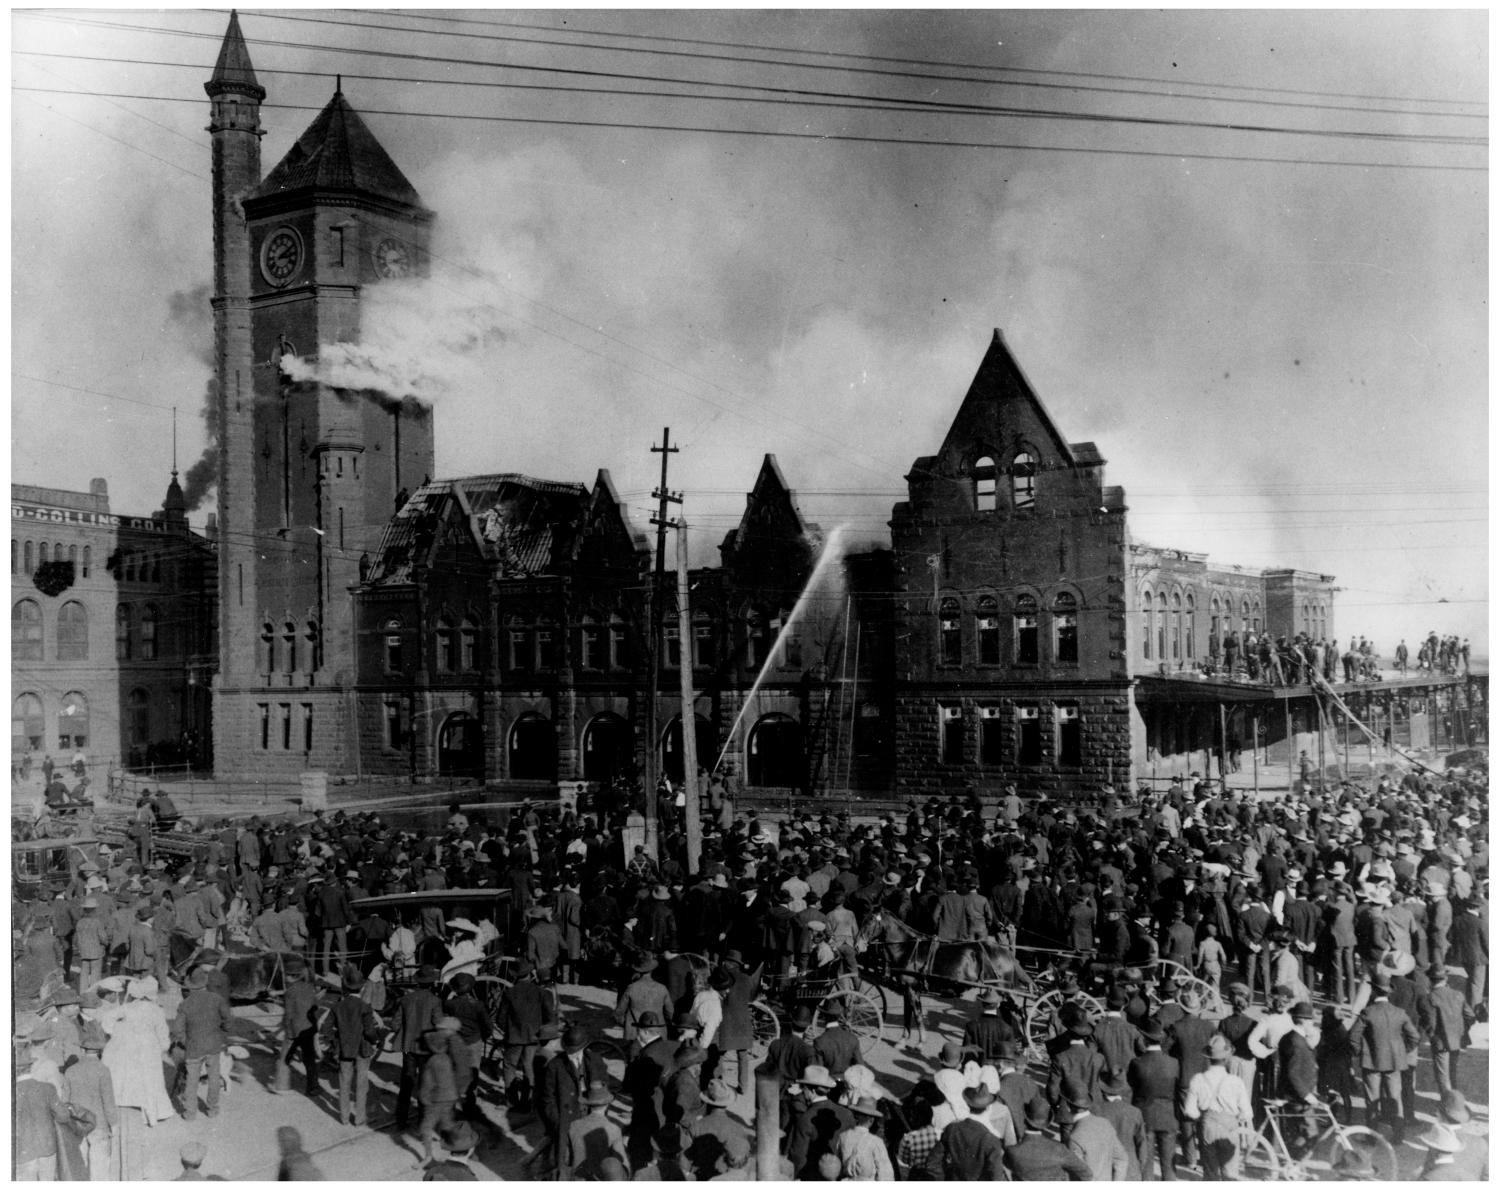 Image of T&P Stations & Structures in First Texas and Pacific Railway Station on Fire